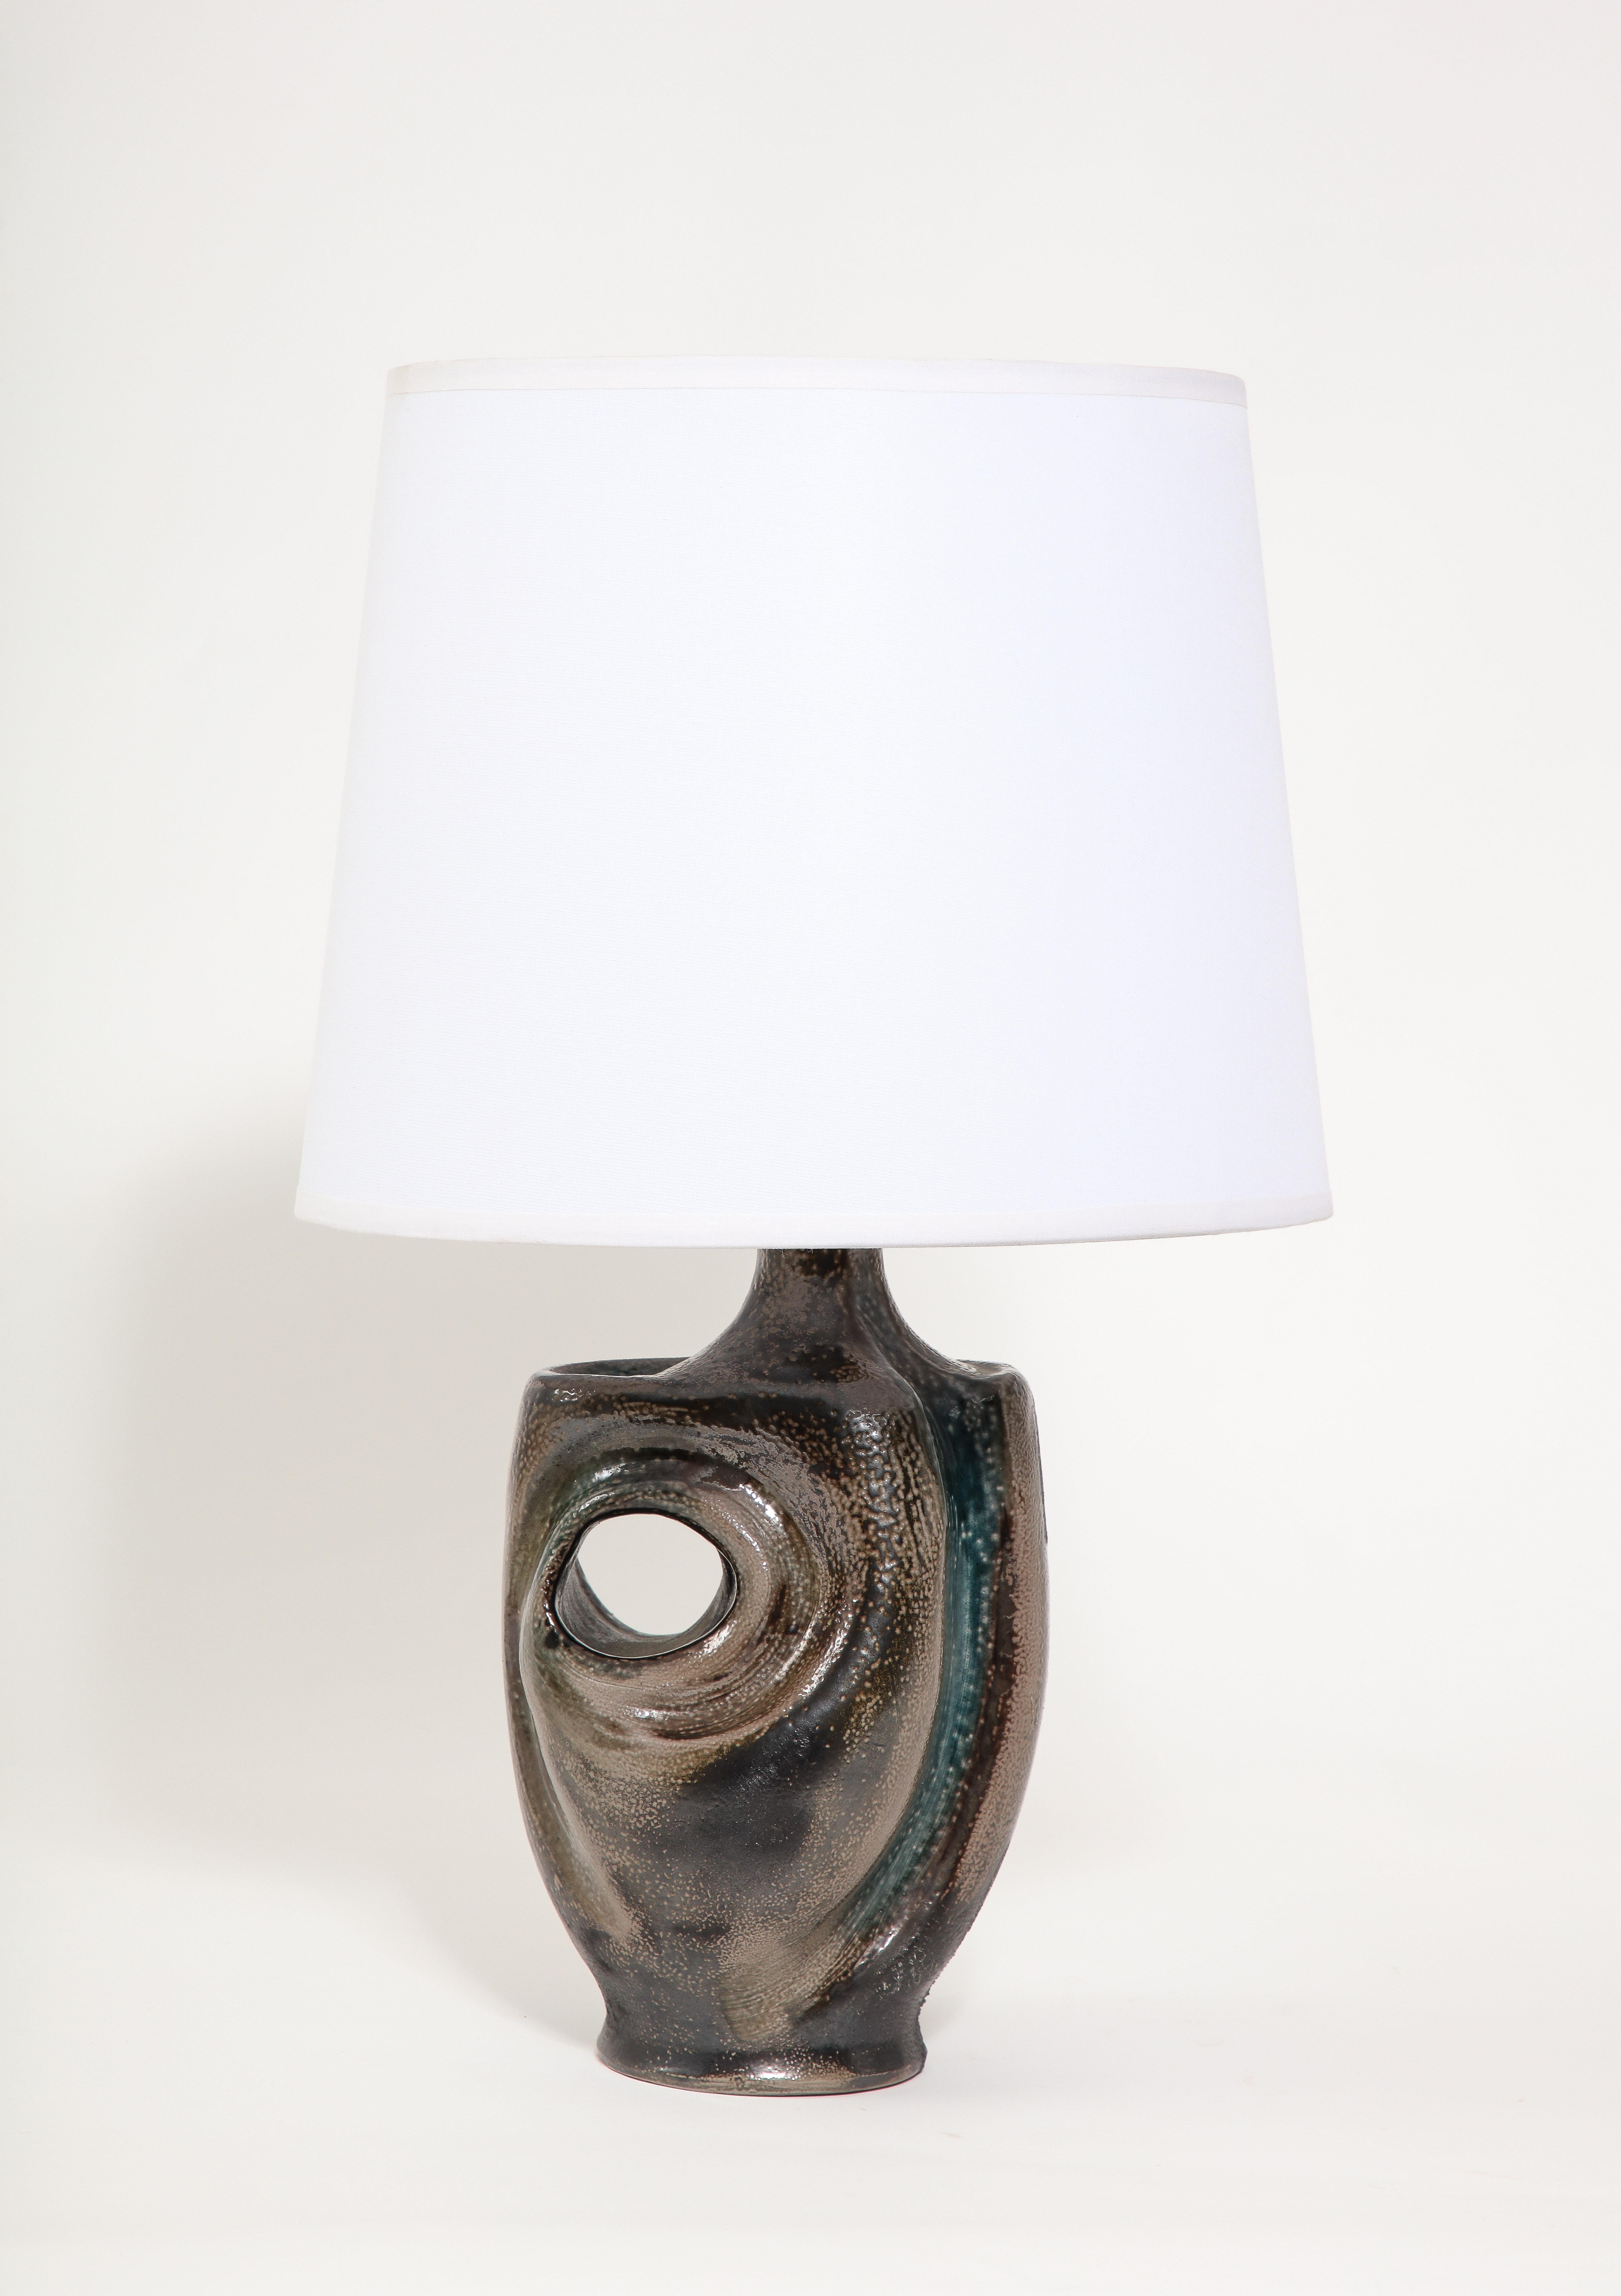 Large Curved Ceramic Lamp in Metallic Glaze, France 1950’s For Sale 1